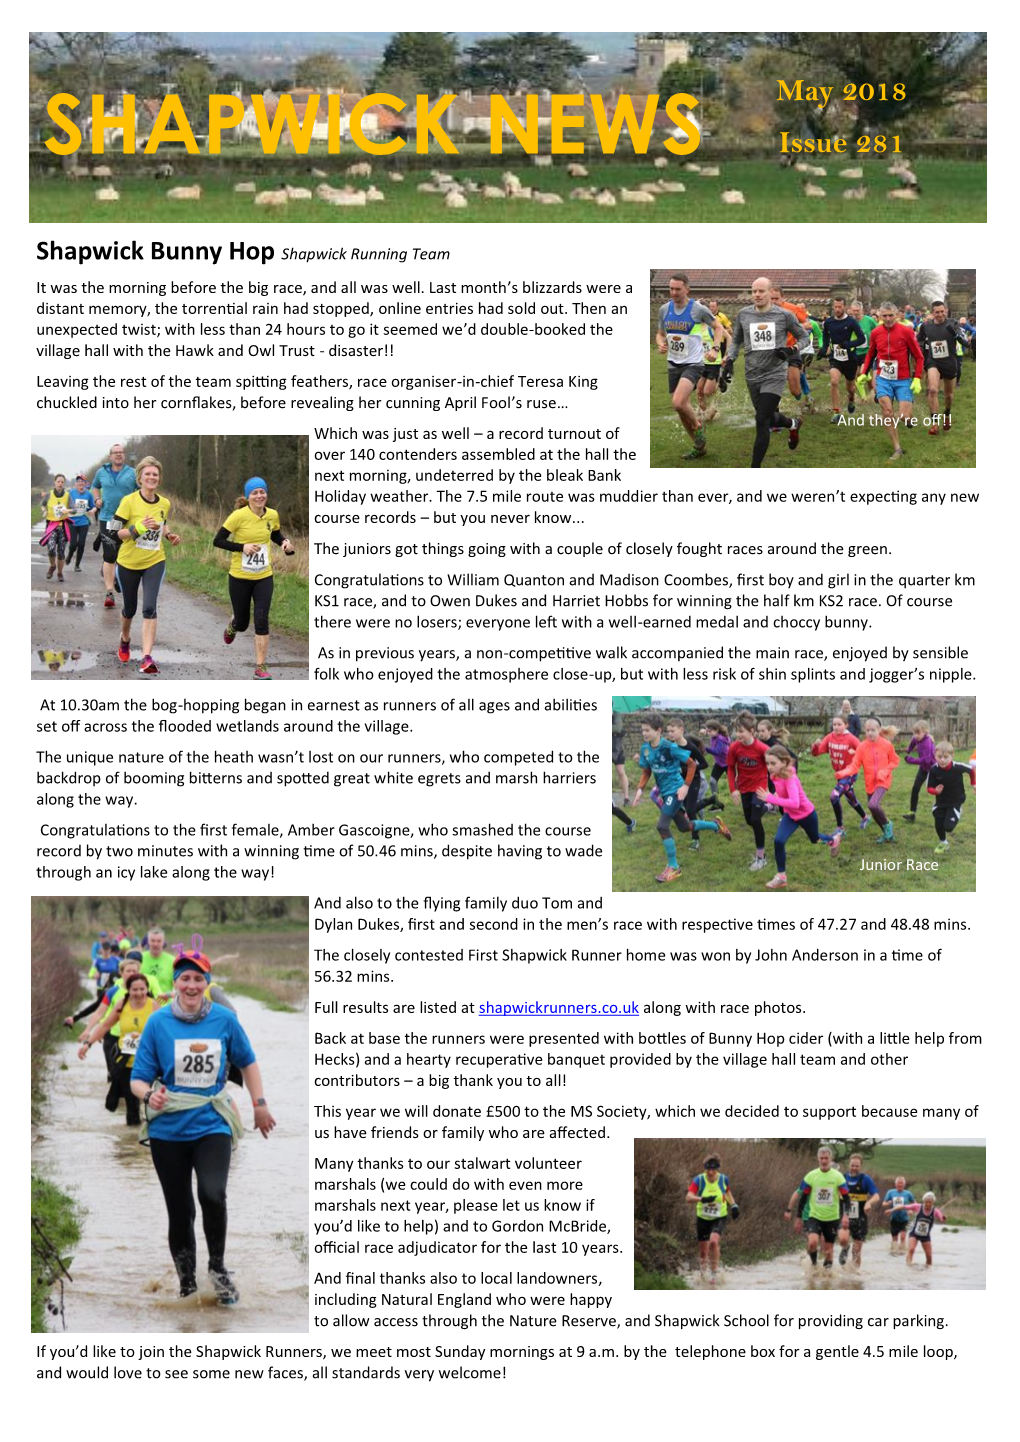 SHAPWICK NEWS Issue 281